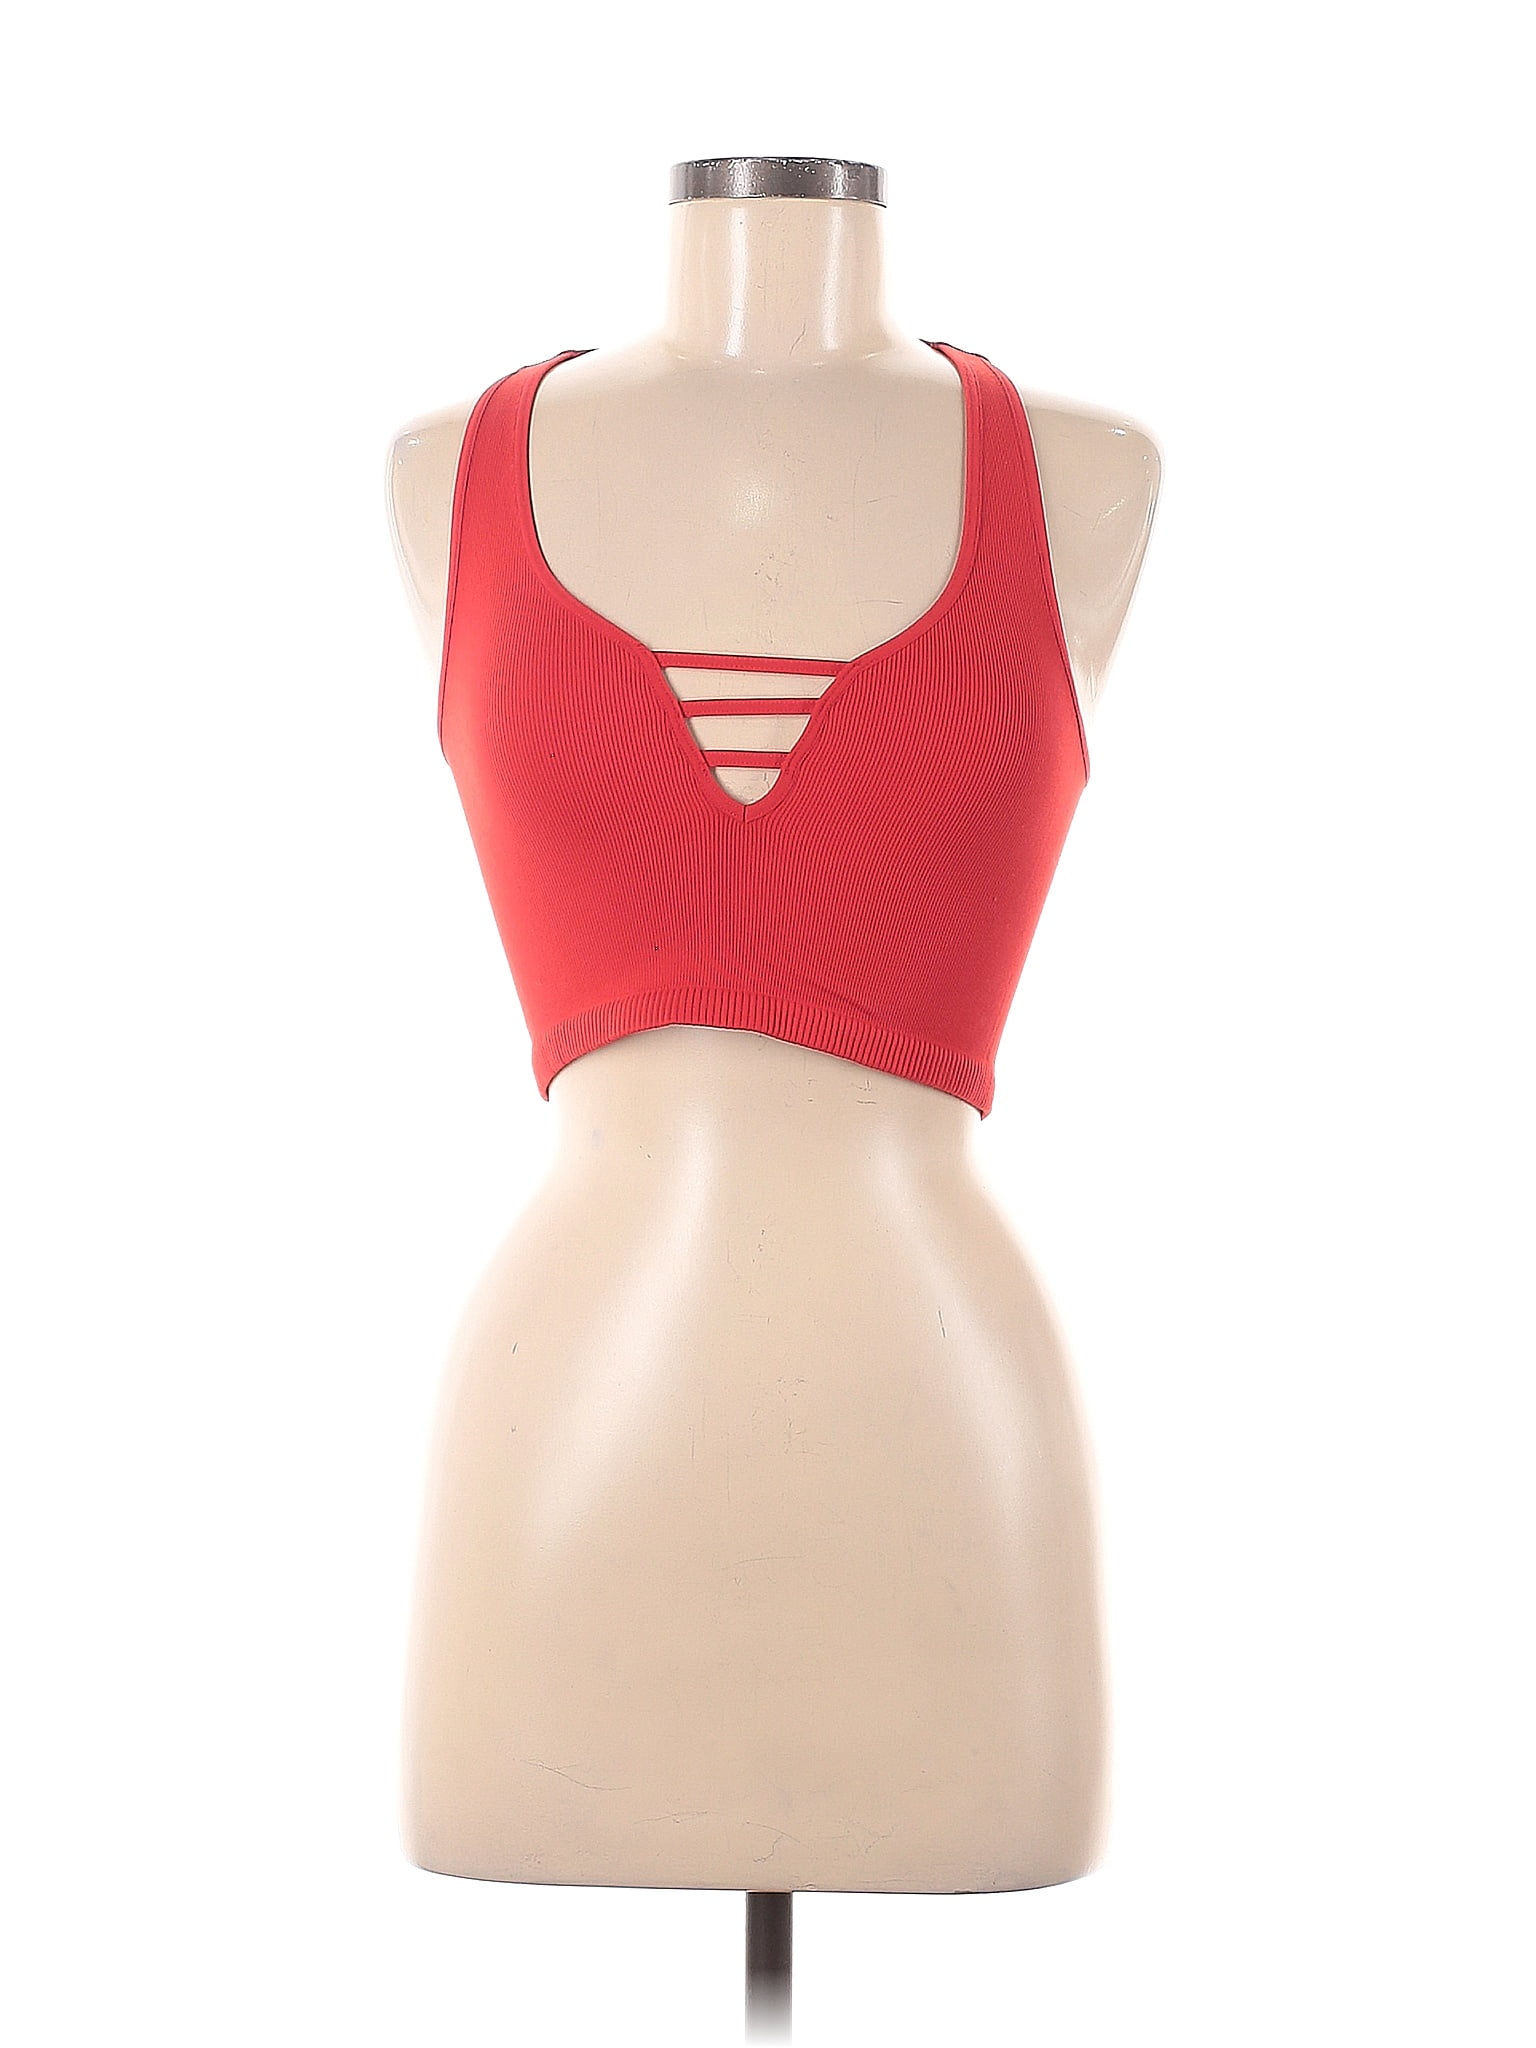 Intimately by Free People Red Sports Bra Size Med - Lg - 54% off